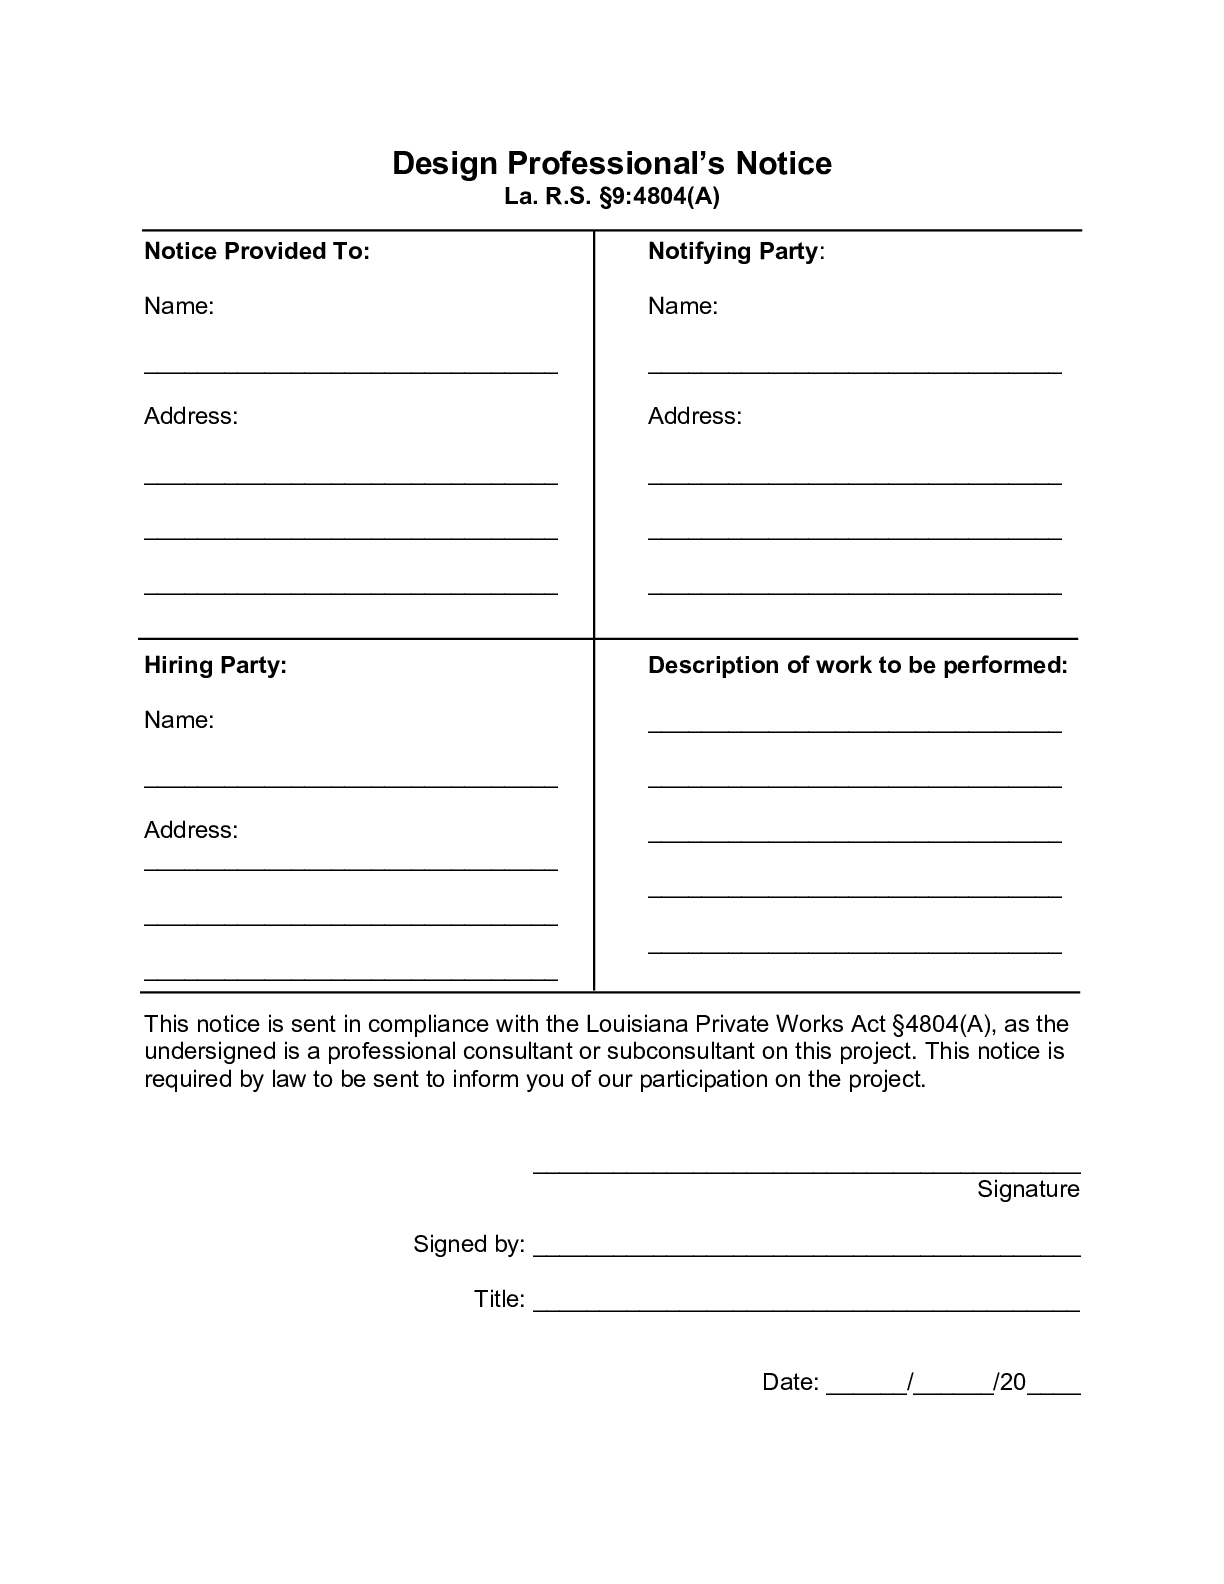 Louisiana Design Professional Notice Form - free from